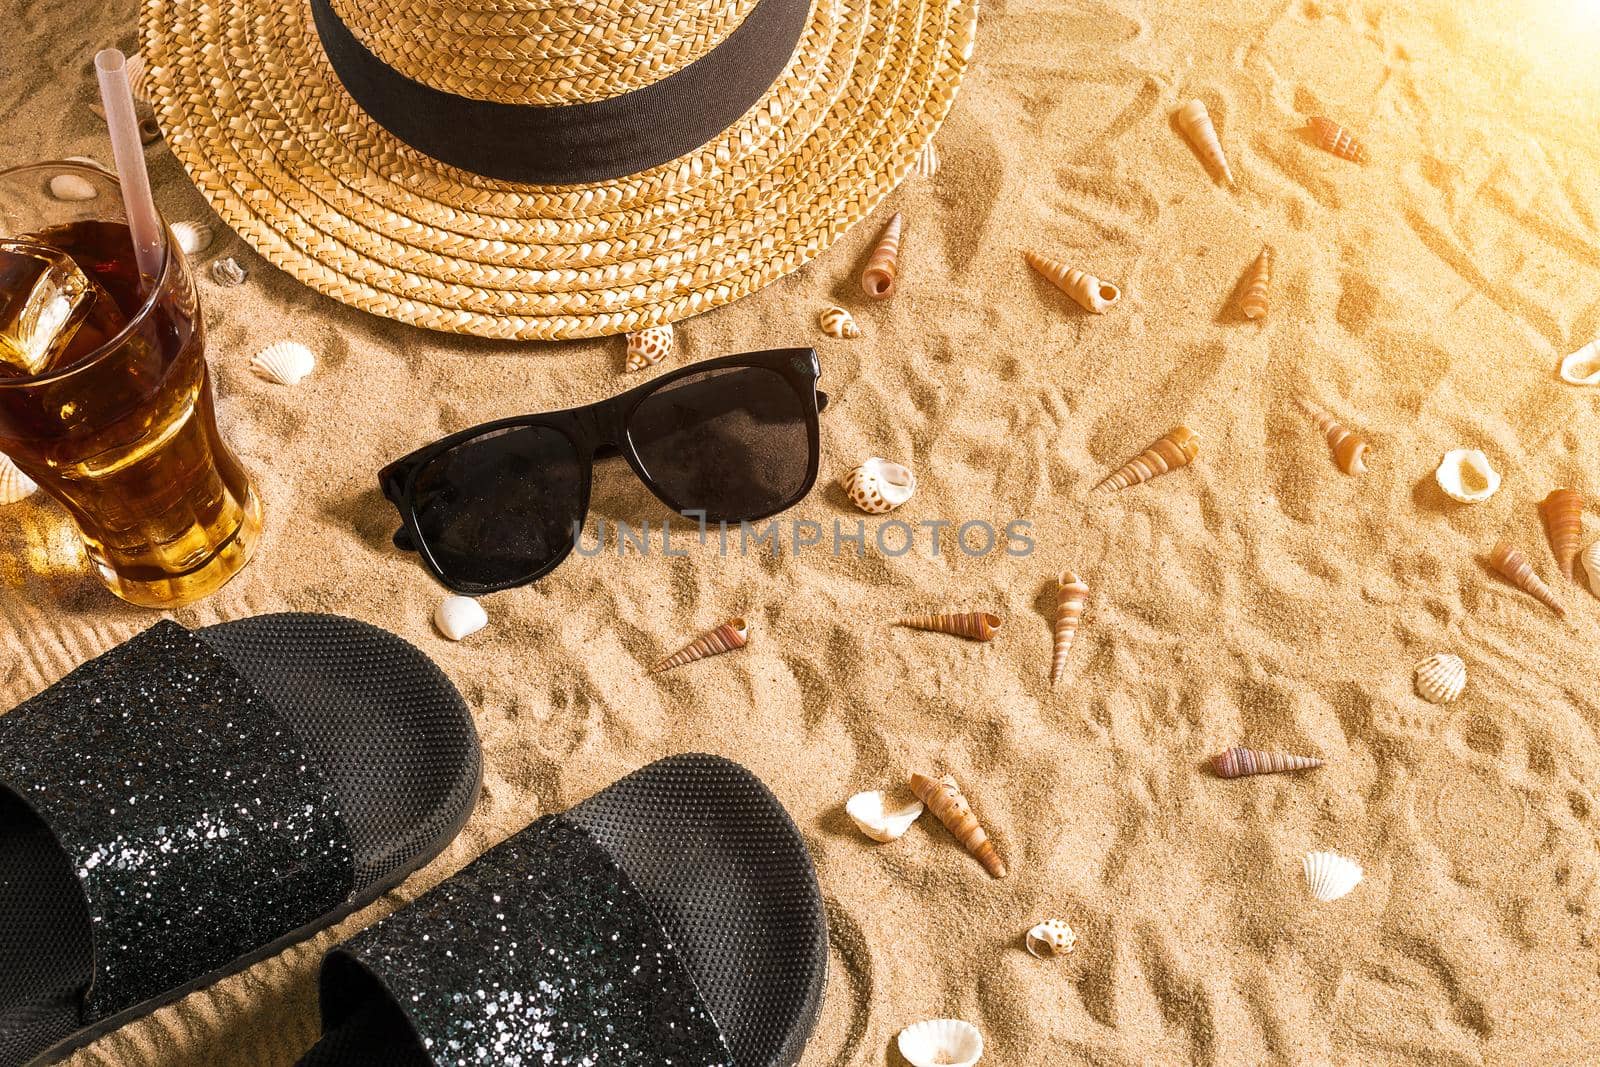 Summer beachwear, flip flops, hat, cold drink in a glass and seashells on sand beach. Top view. Copy space. Sun flare